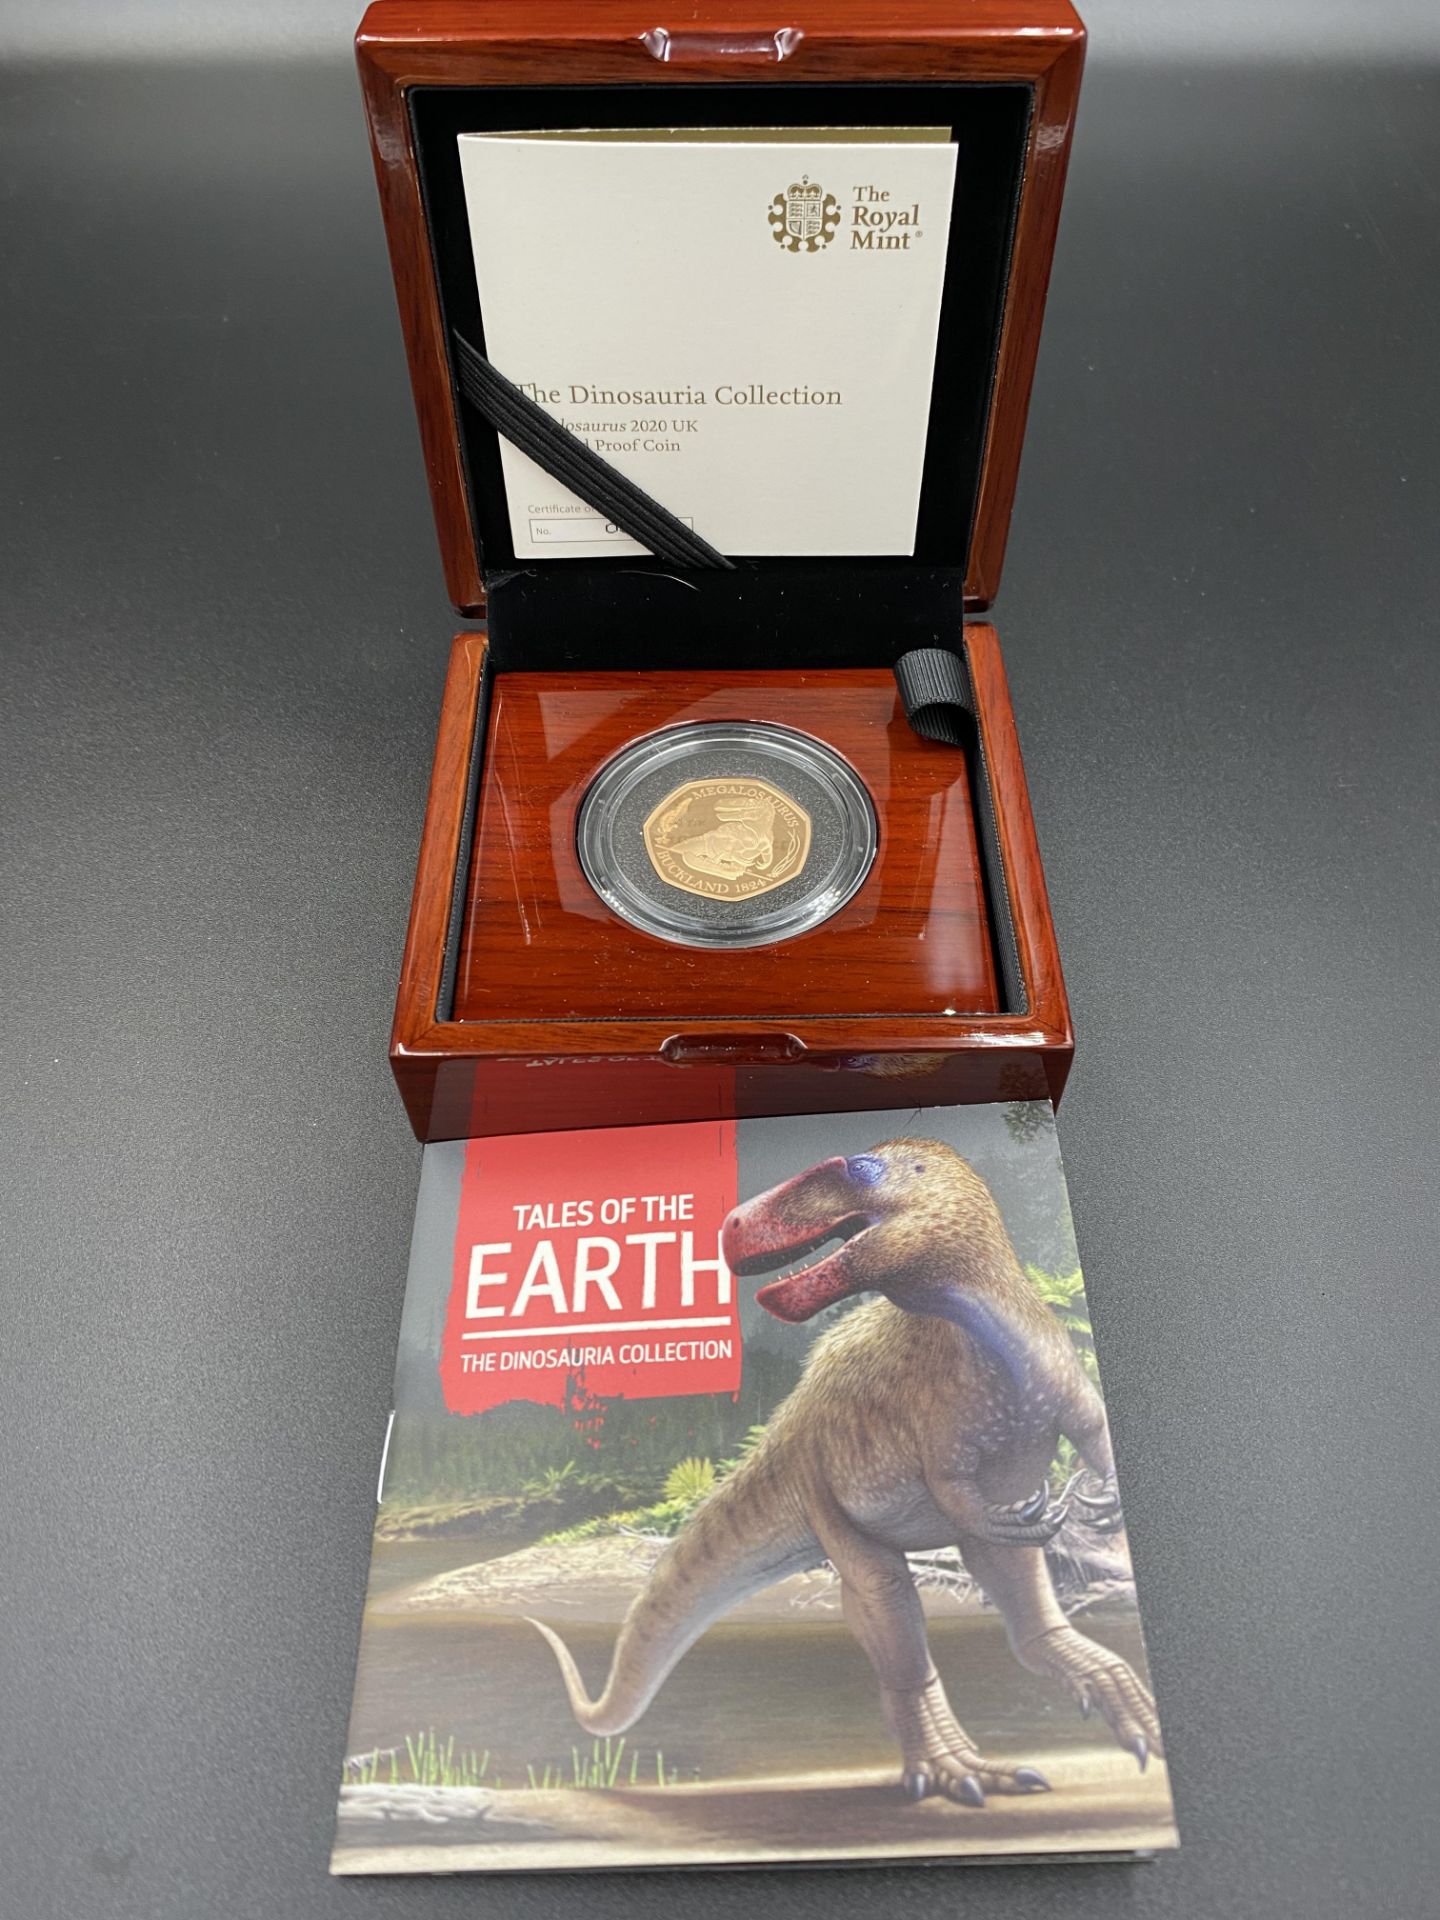 Royal Mint Dinosauria Collection limited edition Megalosaurus 2020 UK 22ct 50p gold proof coin - Image 5 of 5